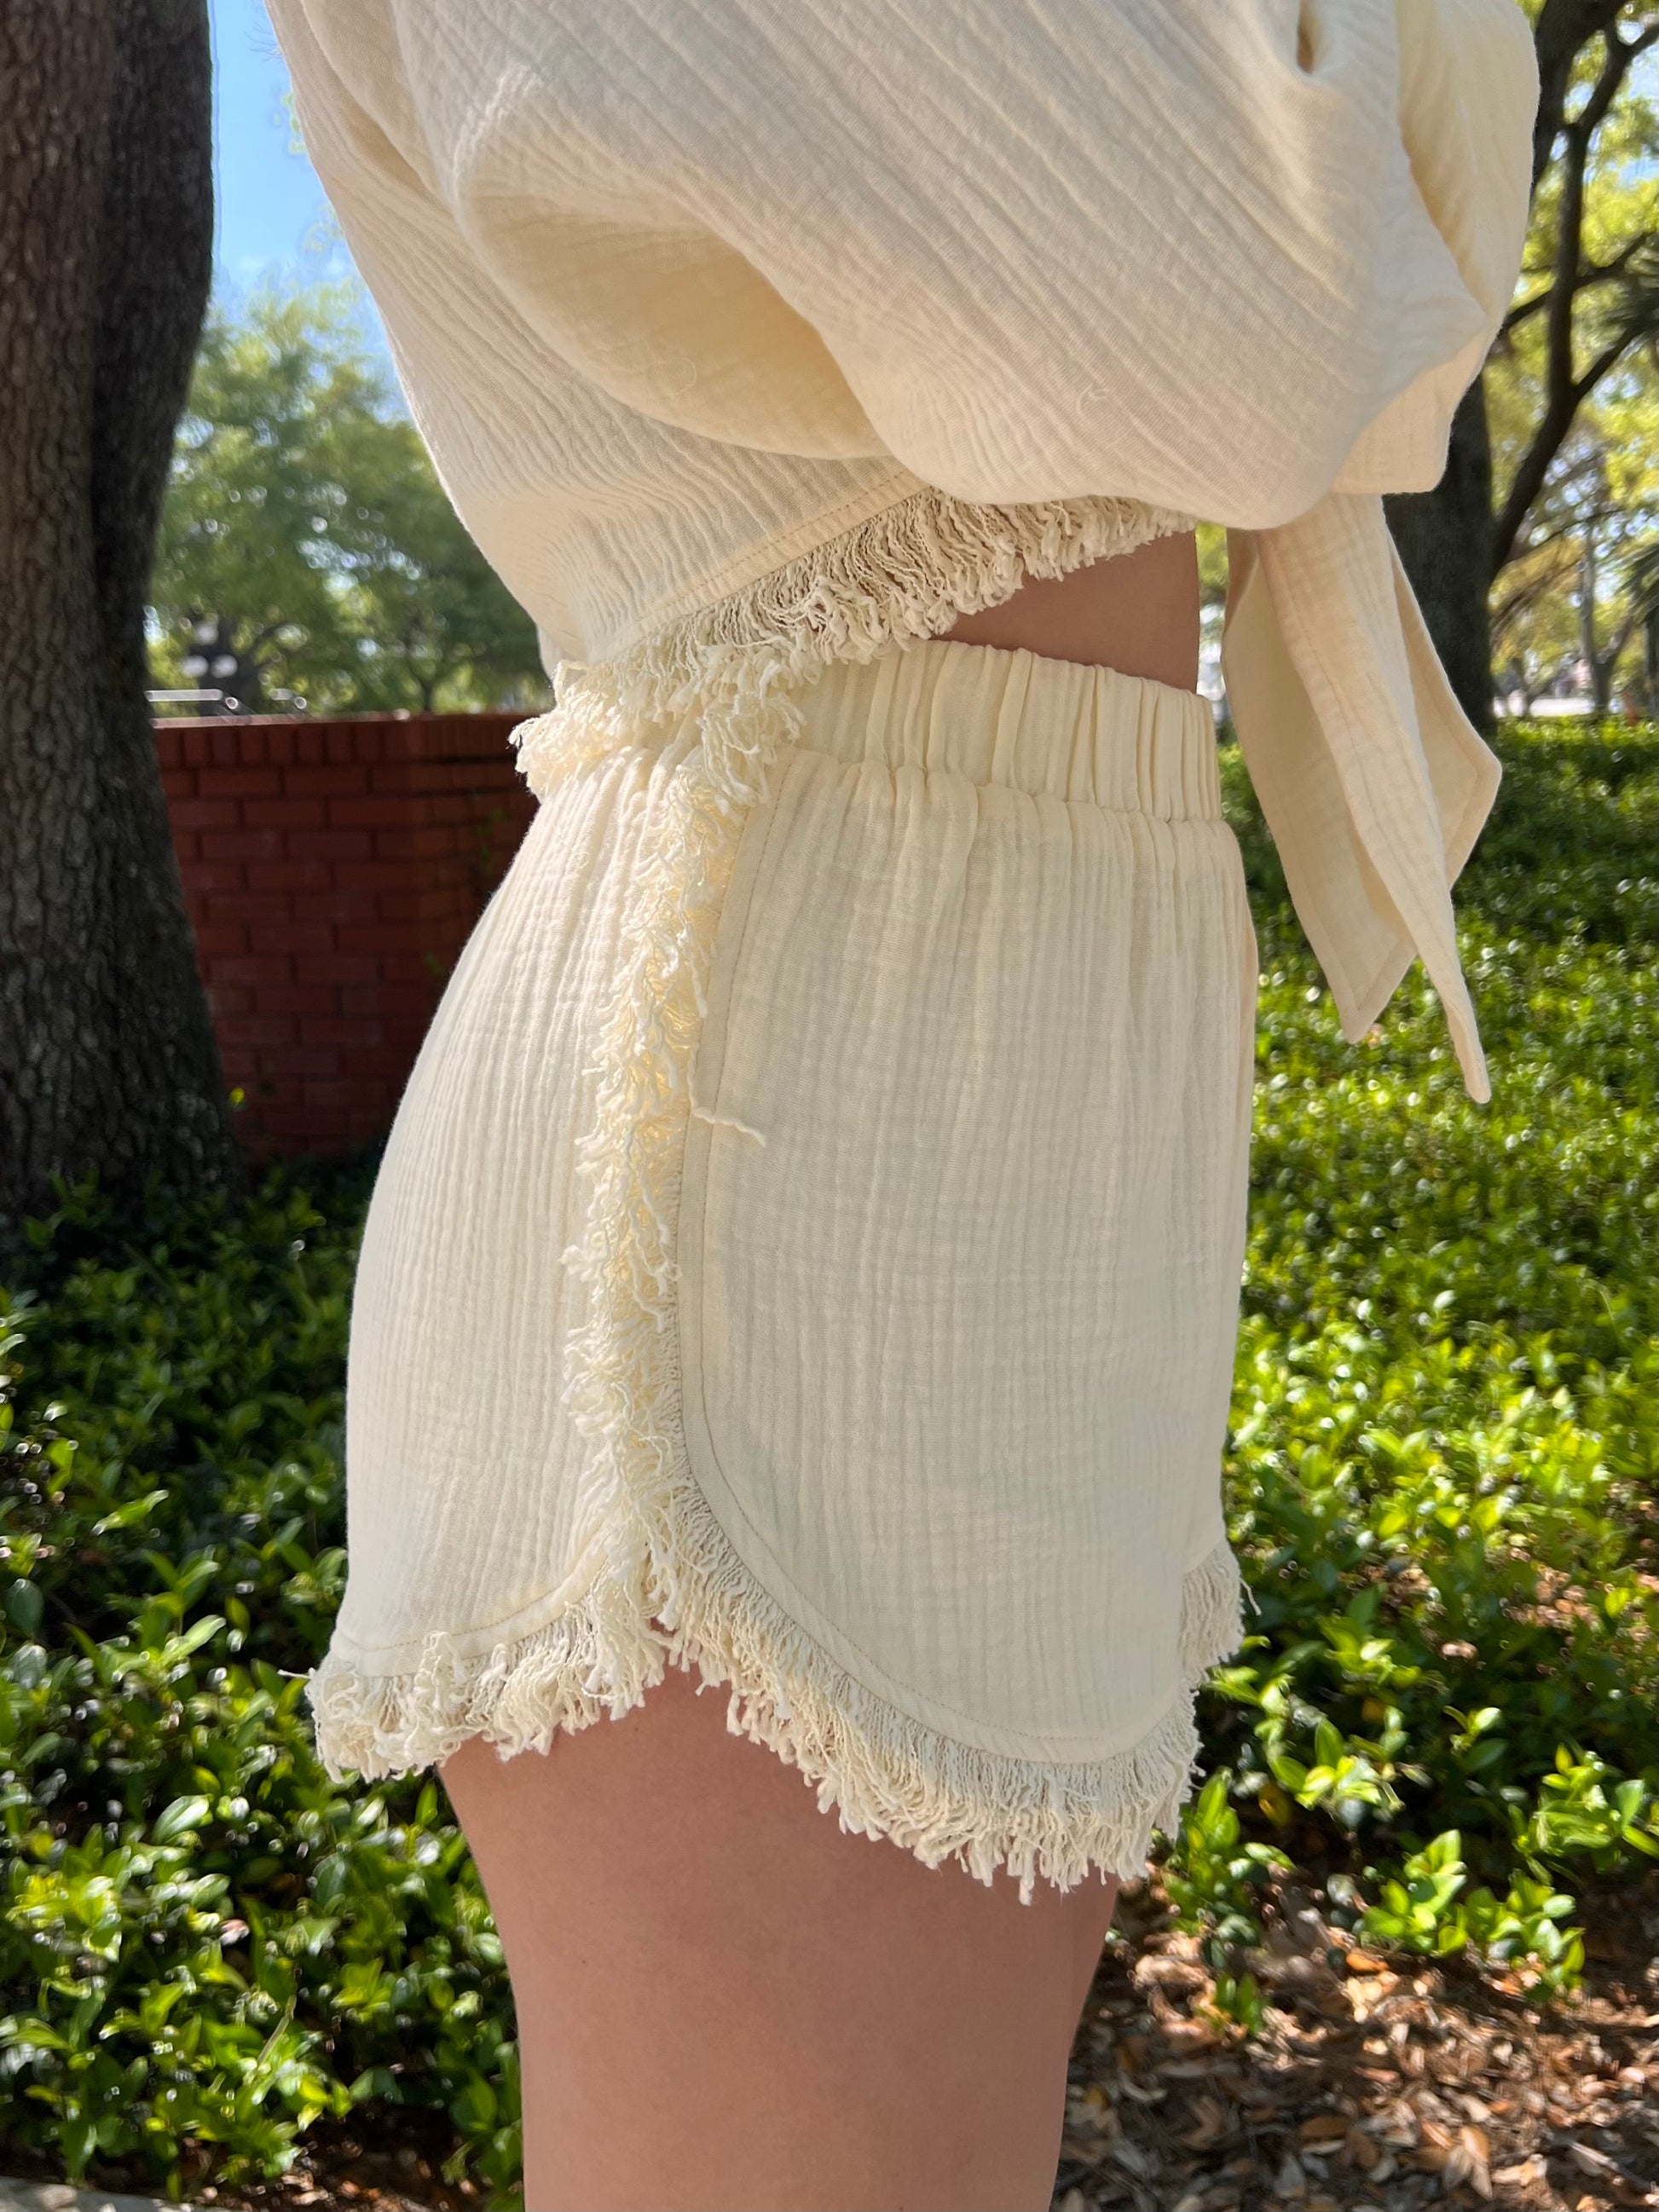 Sierra Cream Colored Shorts with fringe detail